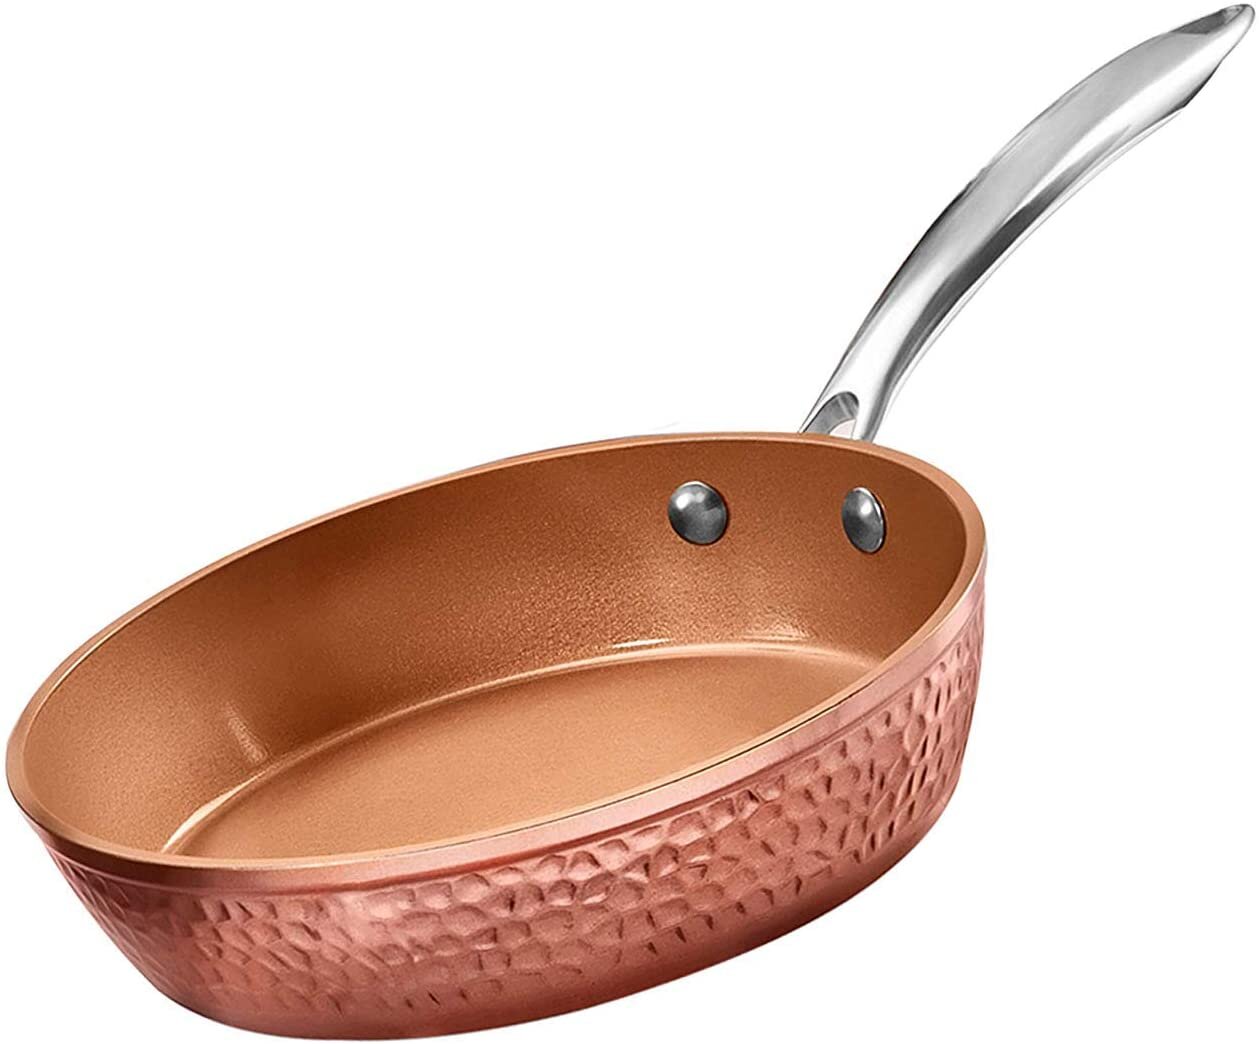 Battle of the Copper Pans: Copper Chef takes on Red Copper & Gotham Steel